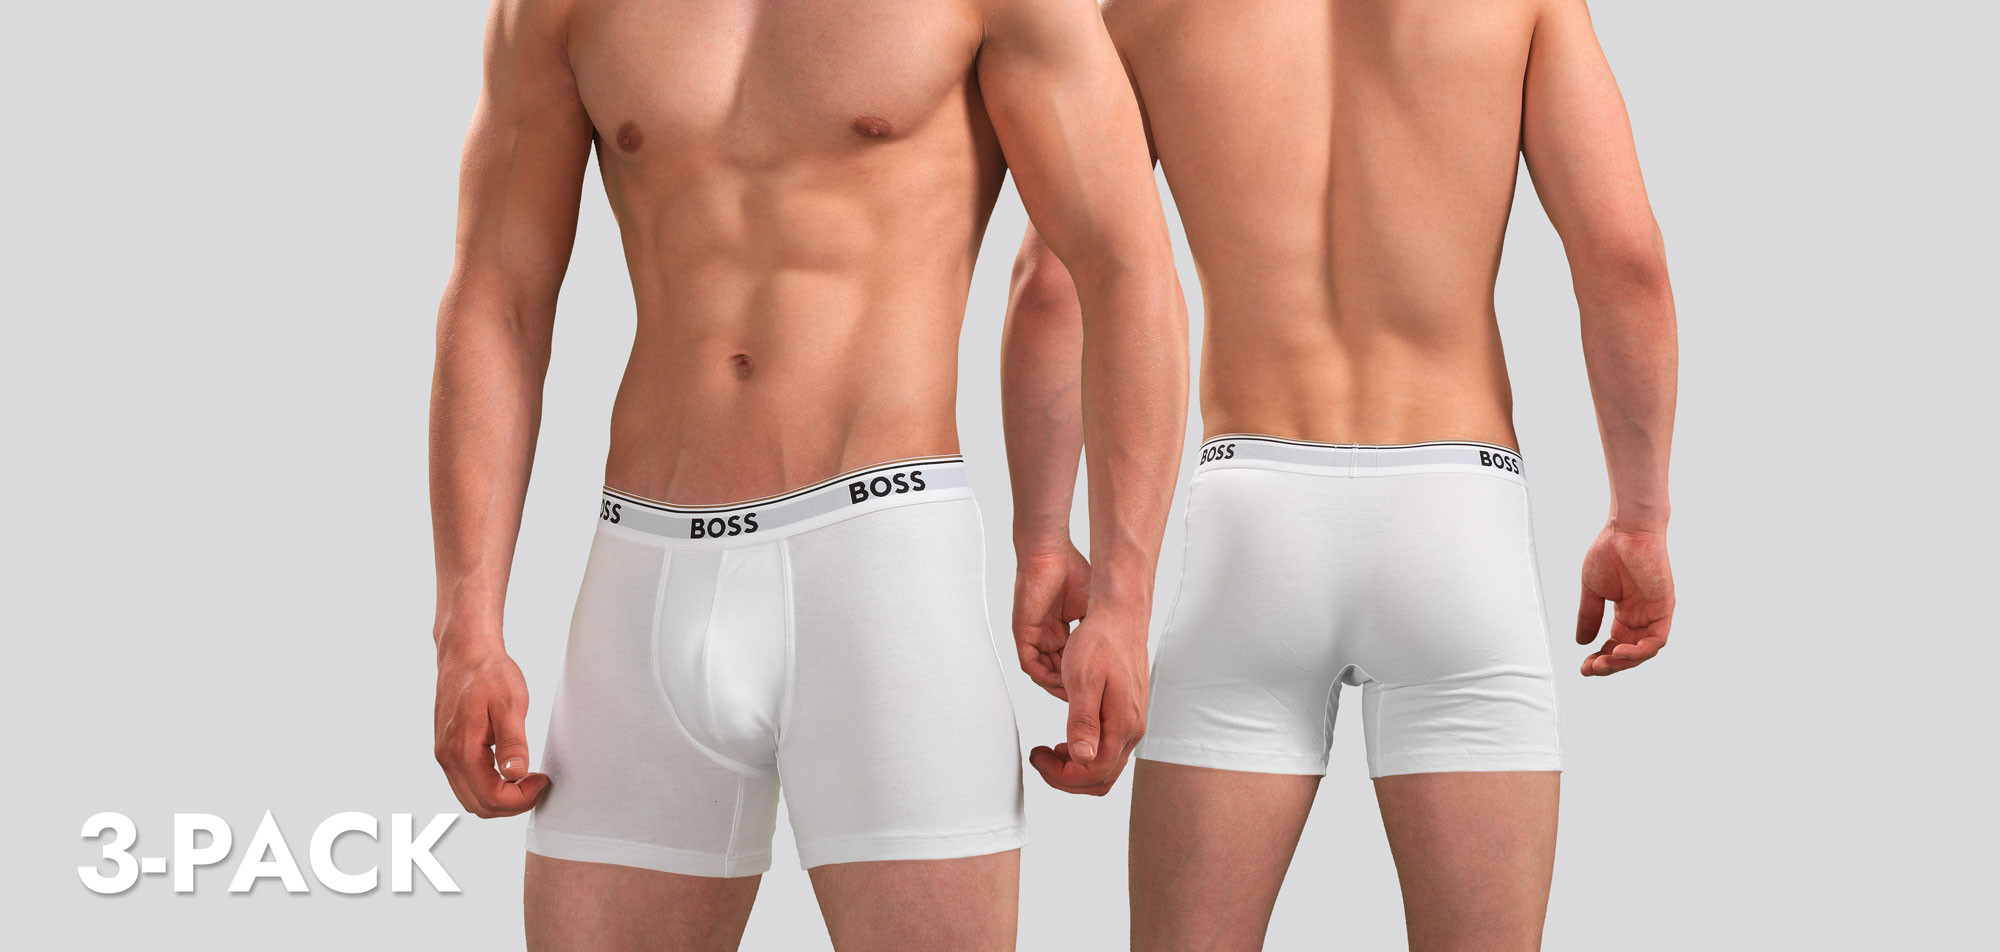 Boss Boxer Brief 3-Pack 282 Power,